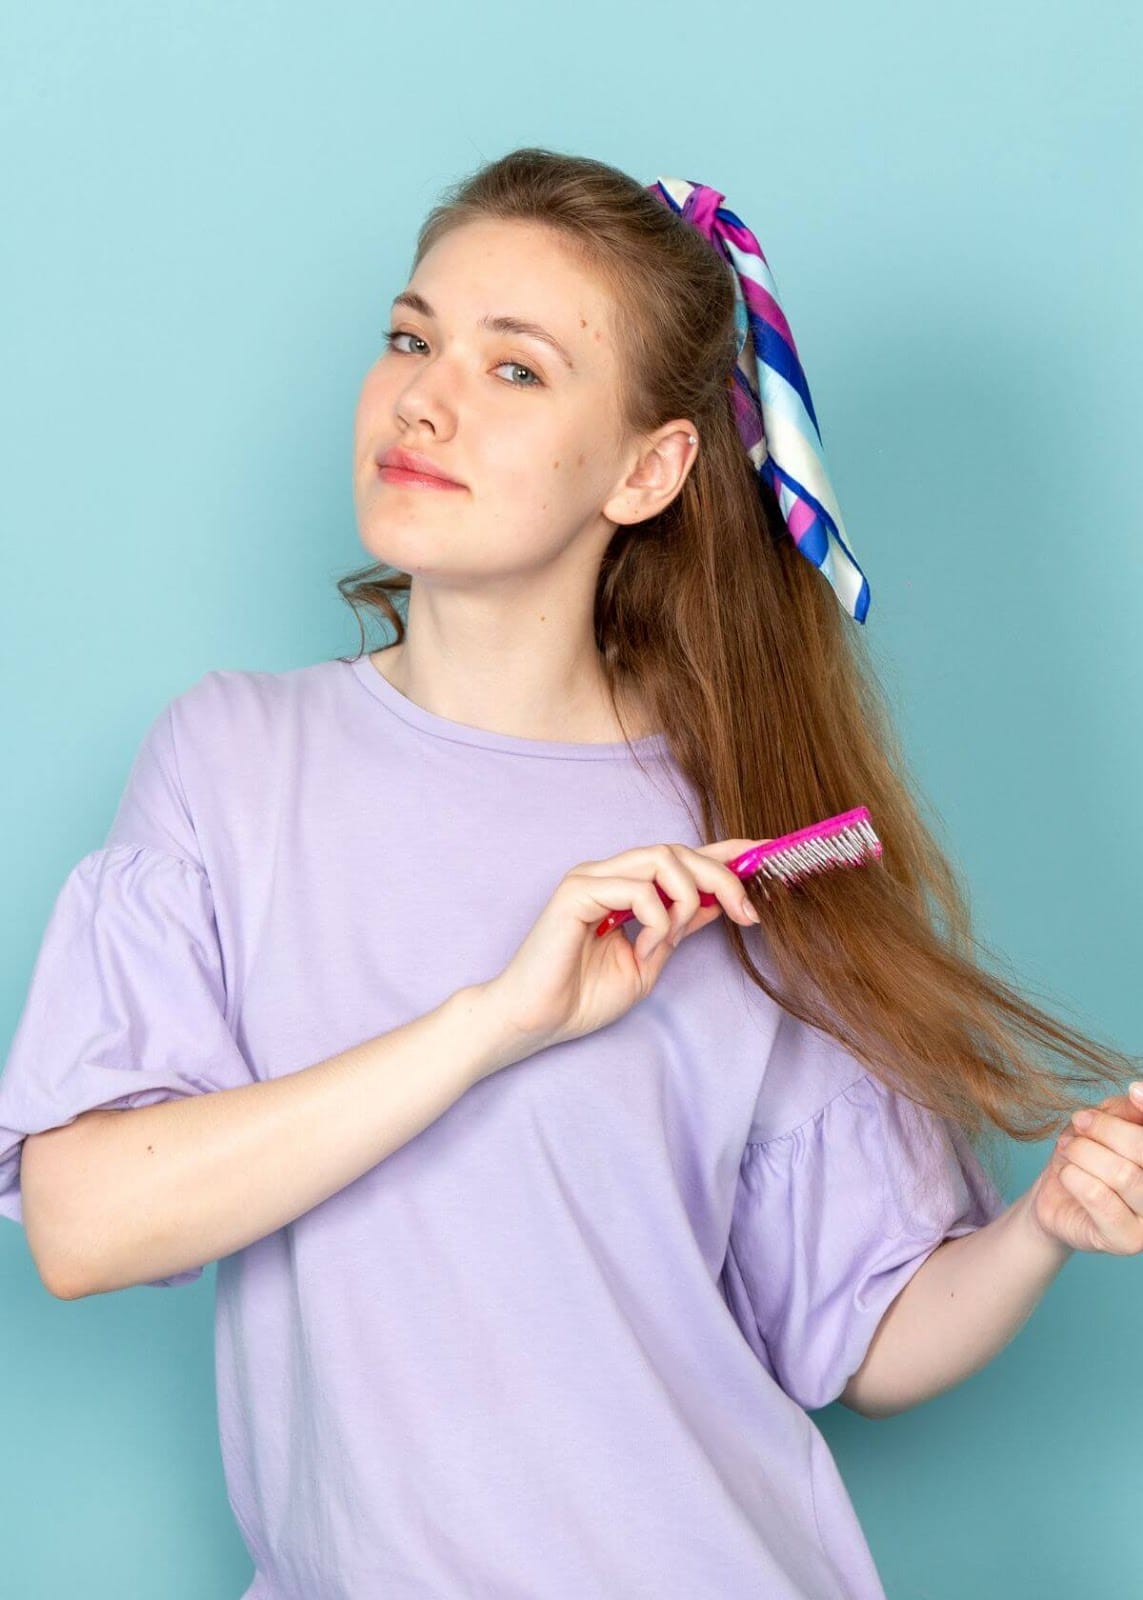 How to choose the best brush for frizzy hair?